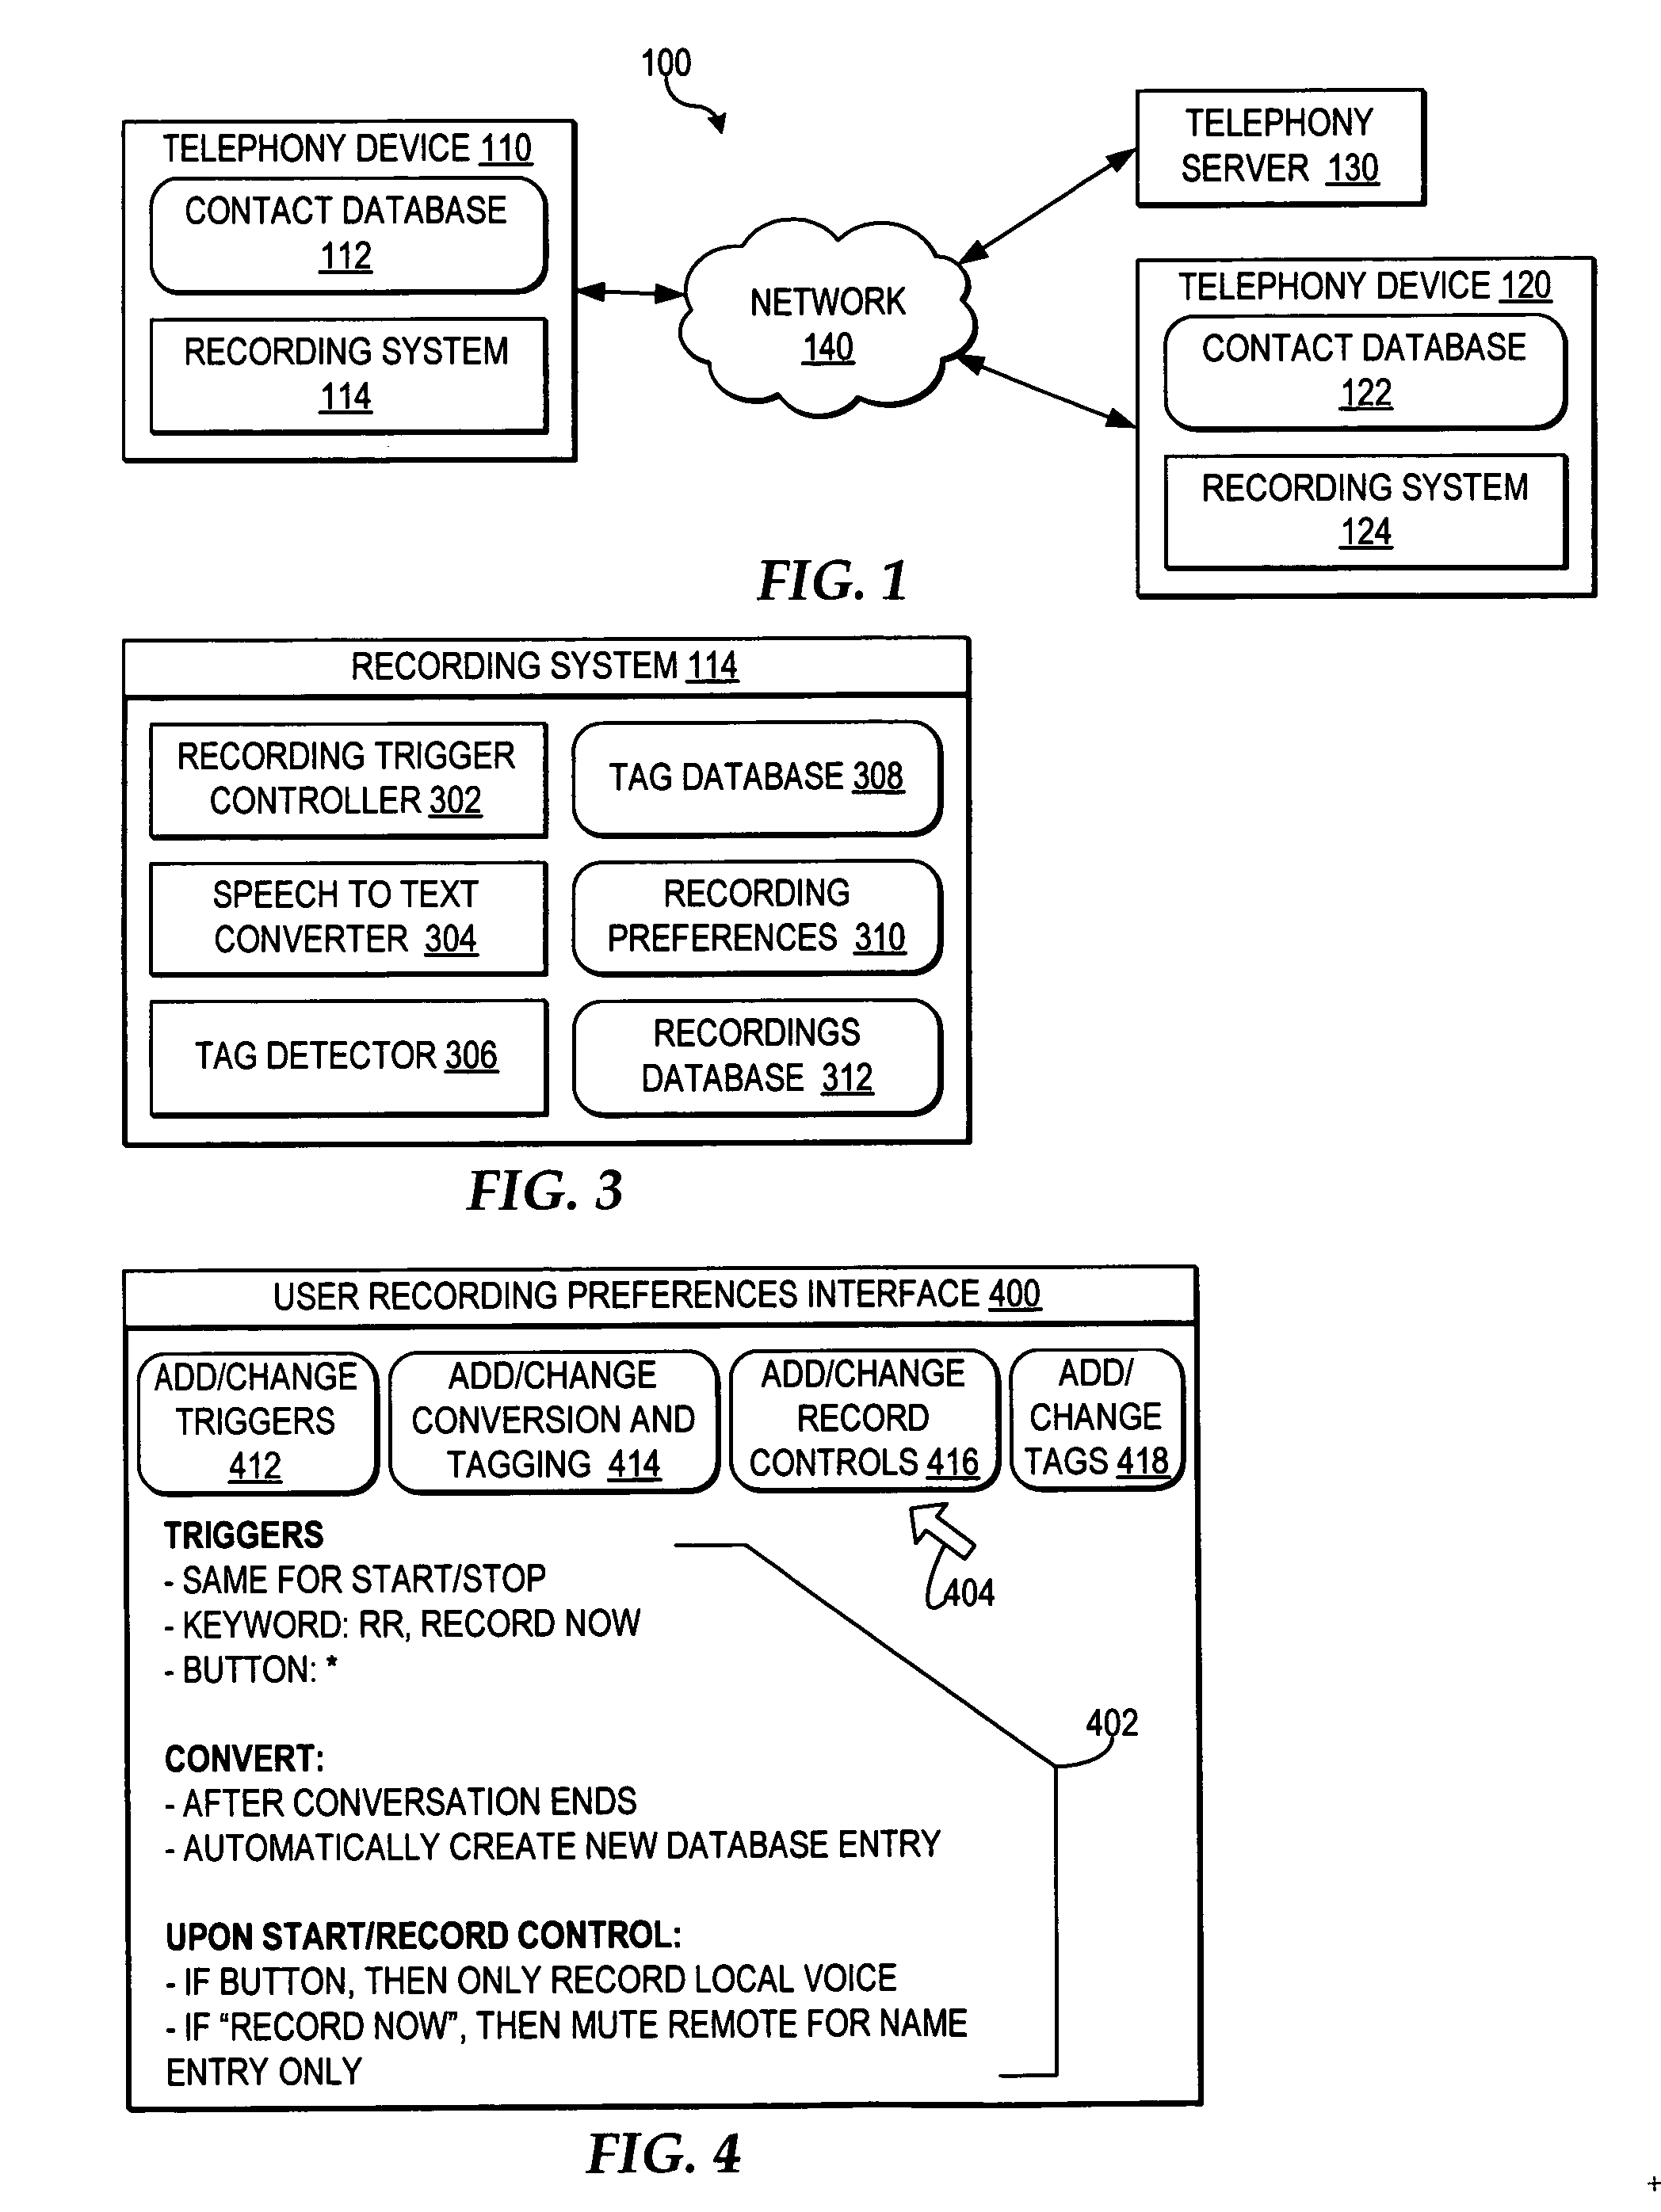 Hands free contact database information entry at a communication device